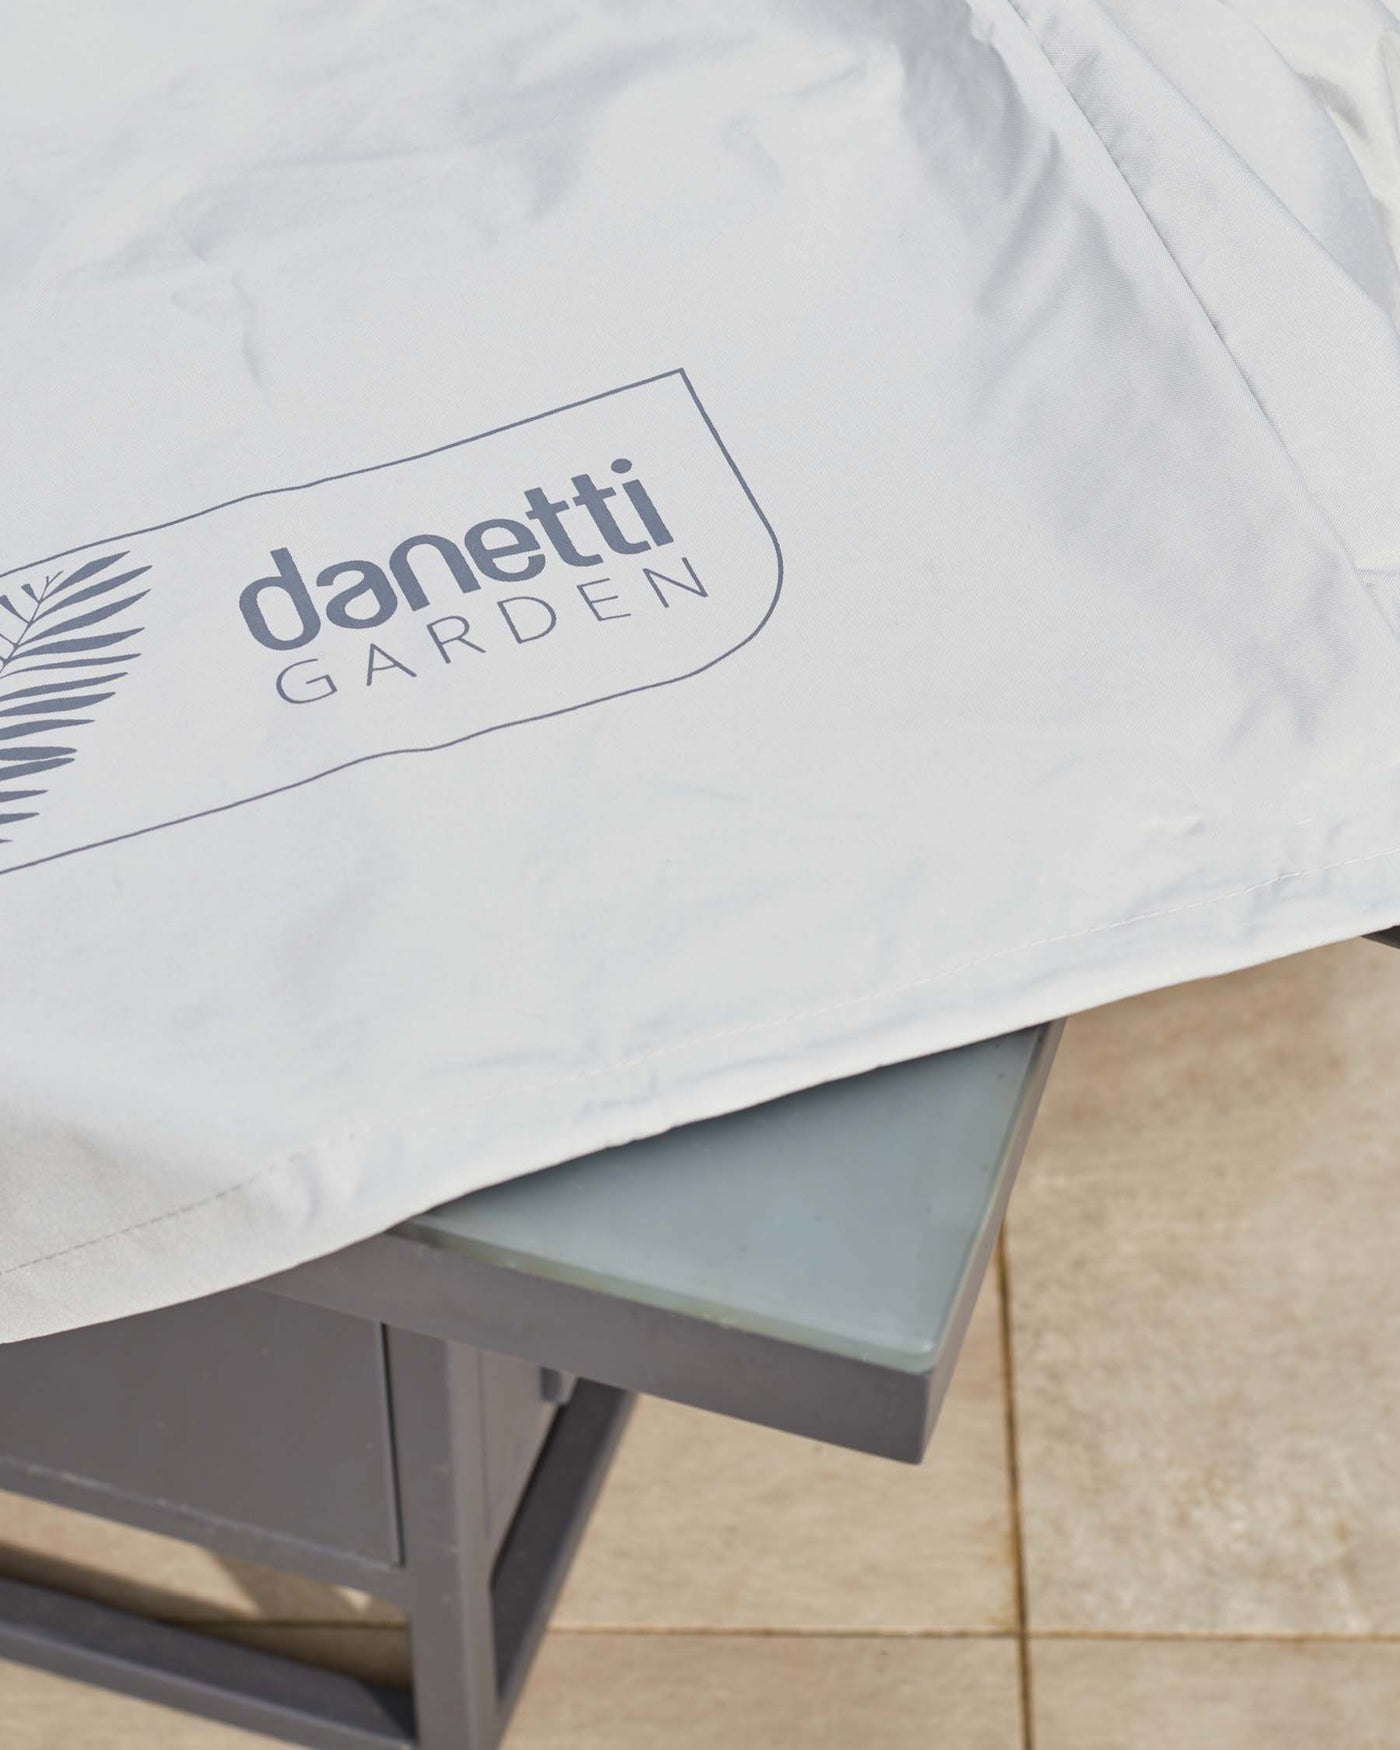 Part of a modern outdoor furniture set, featuring a sleek, grey metal frame with a frosted glass tabletop, complemented by a plush white cushion with the 'Danetti Garden' logo printed on it, suggesting a sophisticated and comfortable garden arrangement.